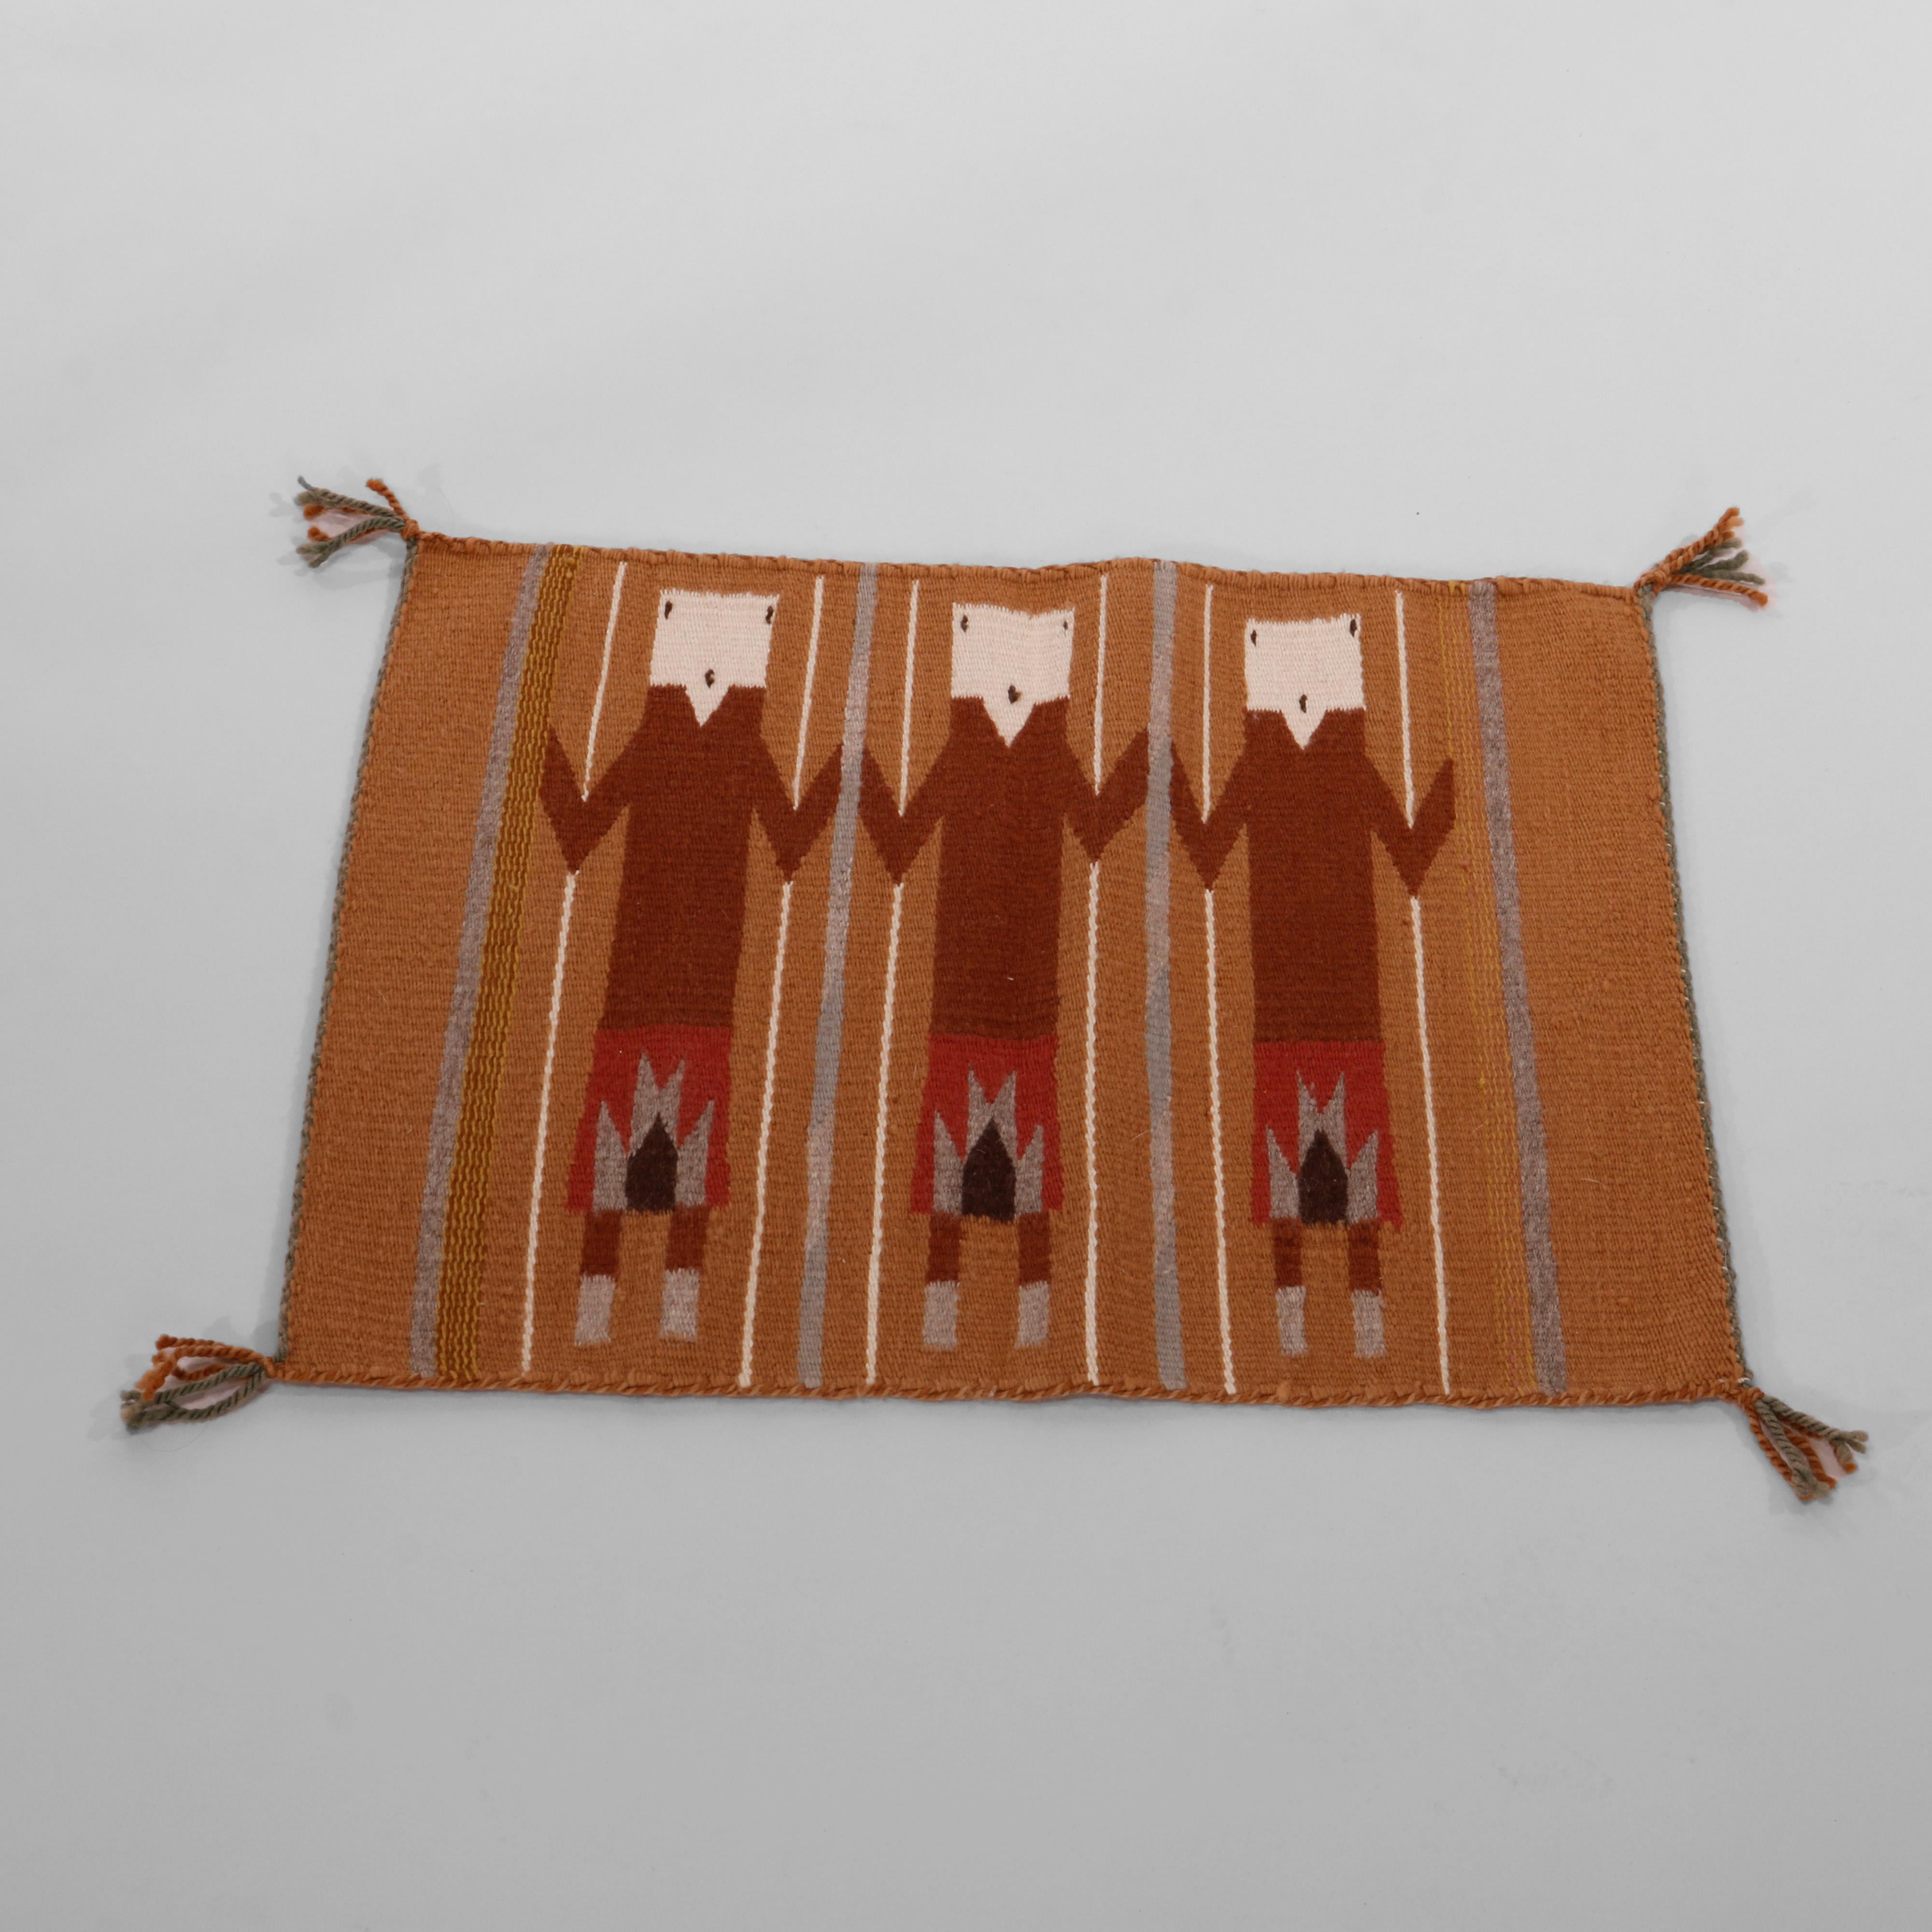 A Southwestern Native American Indian Navajo Yei rug offers hand woven wool construction with design having three figures, reminiscent of foxes, 20th century

Measures - 21.75''L x 17'' W x .5'' D.

Catalogue Note: Ask about DISCOUNTED DELIVERY